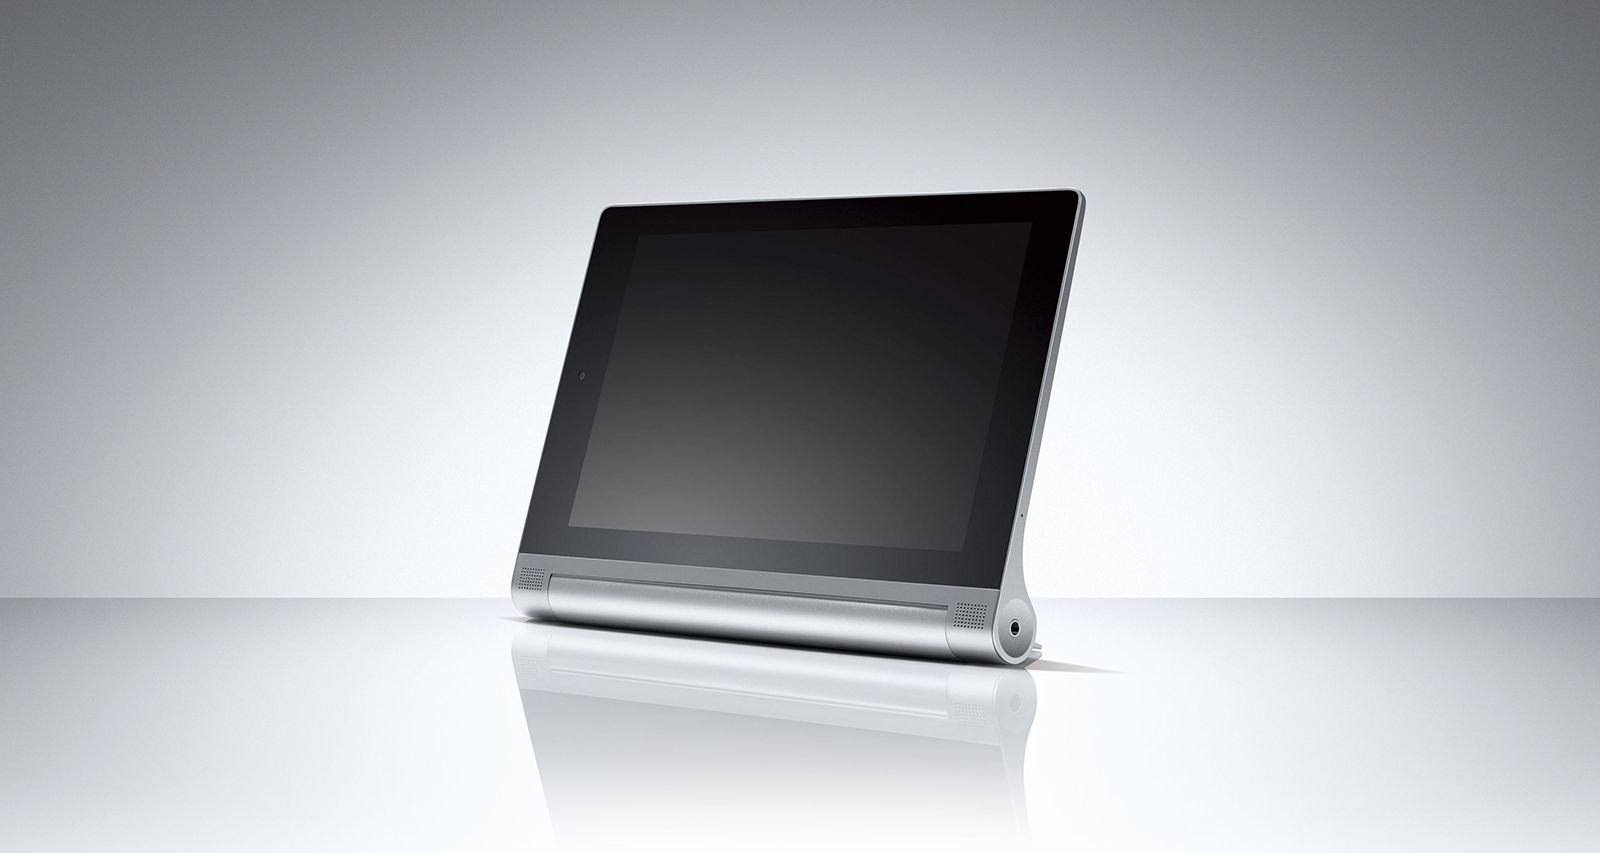 lenovo yoga tablet 2 pro features built in projector and qhd screen image 2